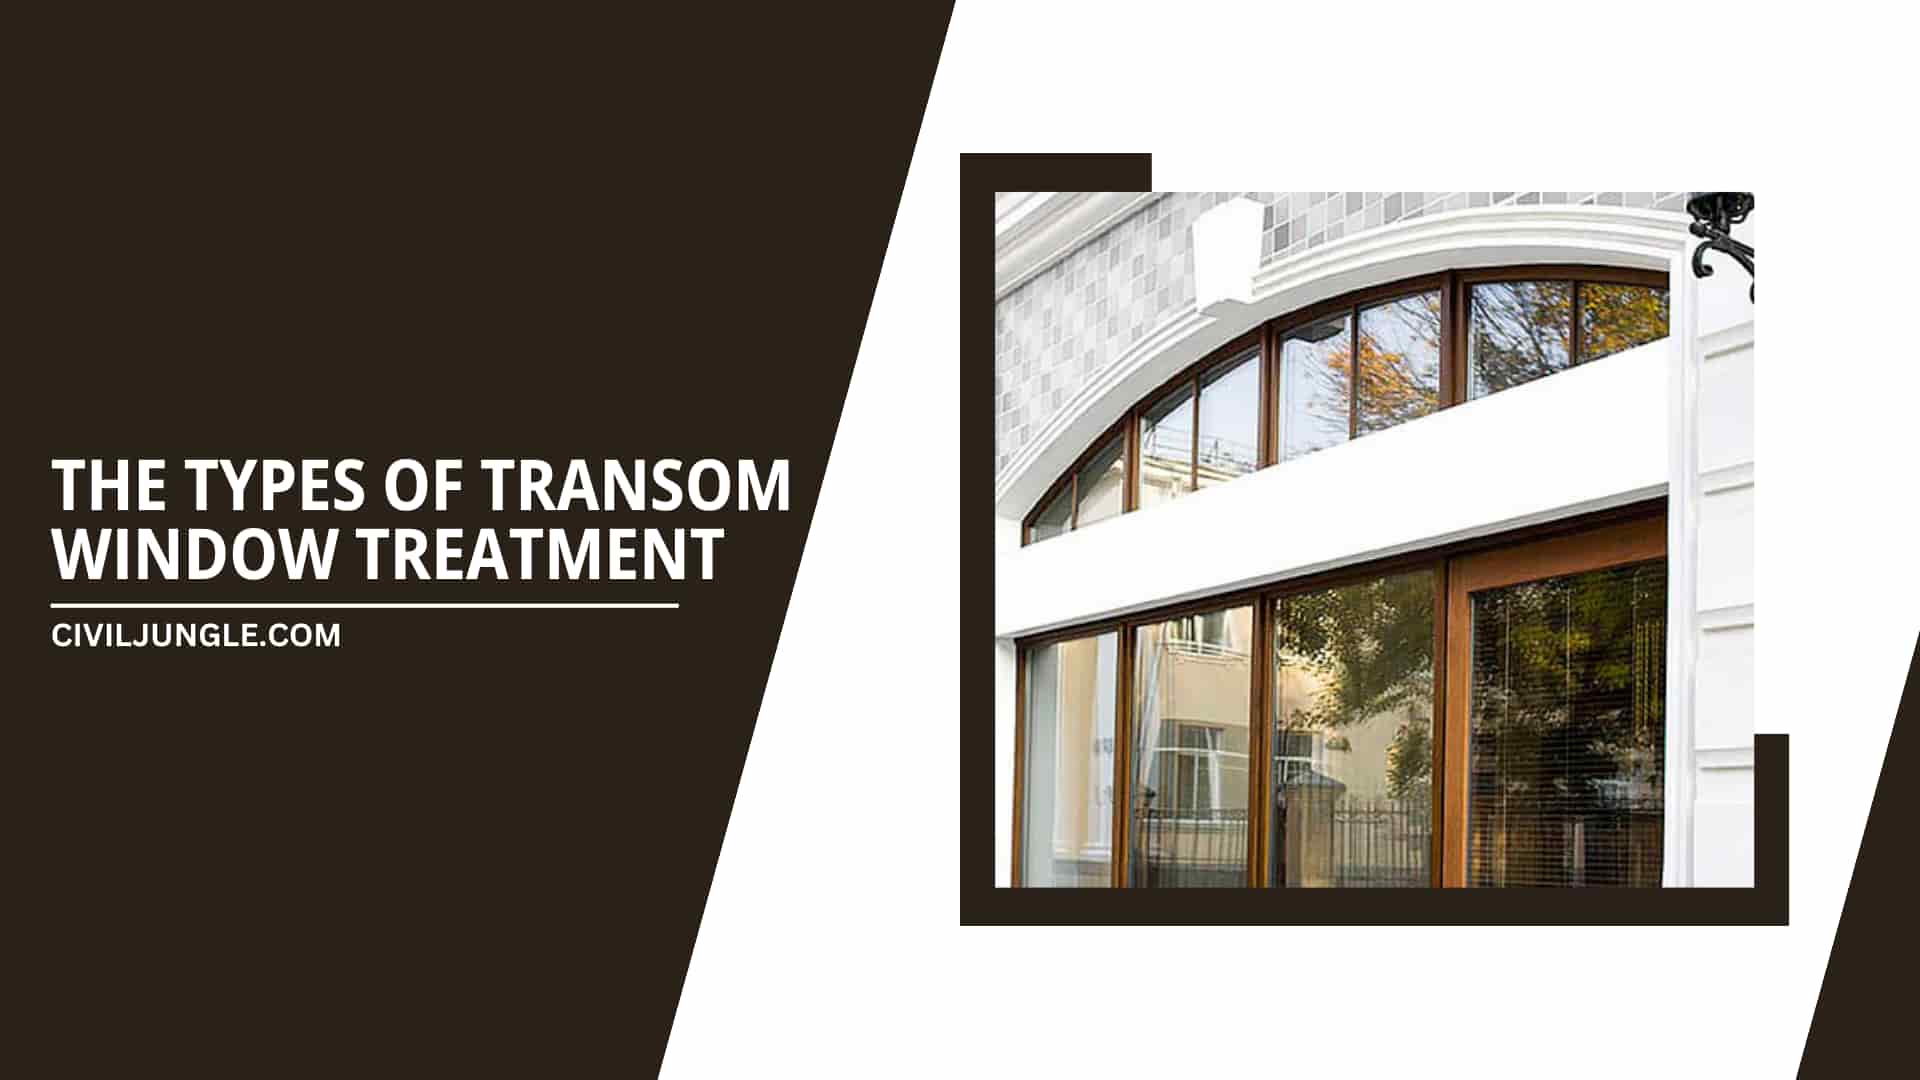 THE TYPES OF TRANSOM WINDOW TREATMENT 